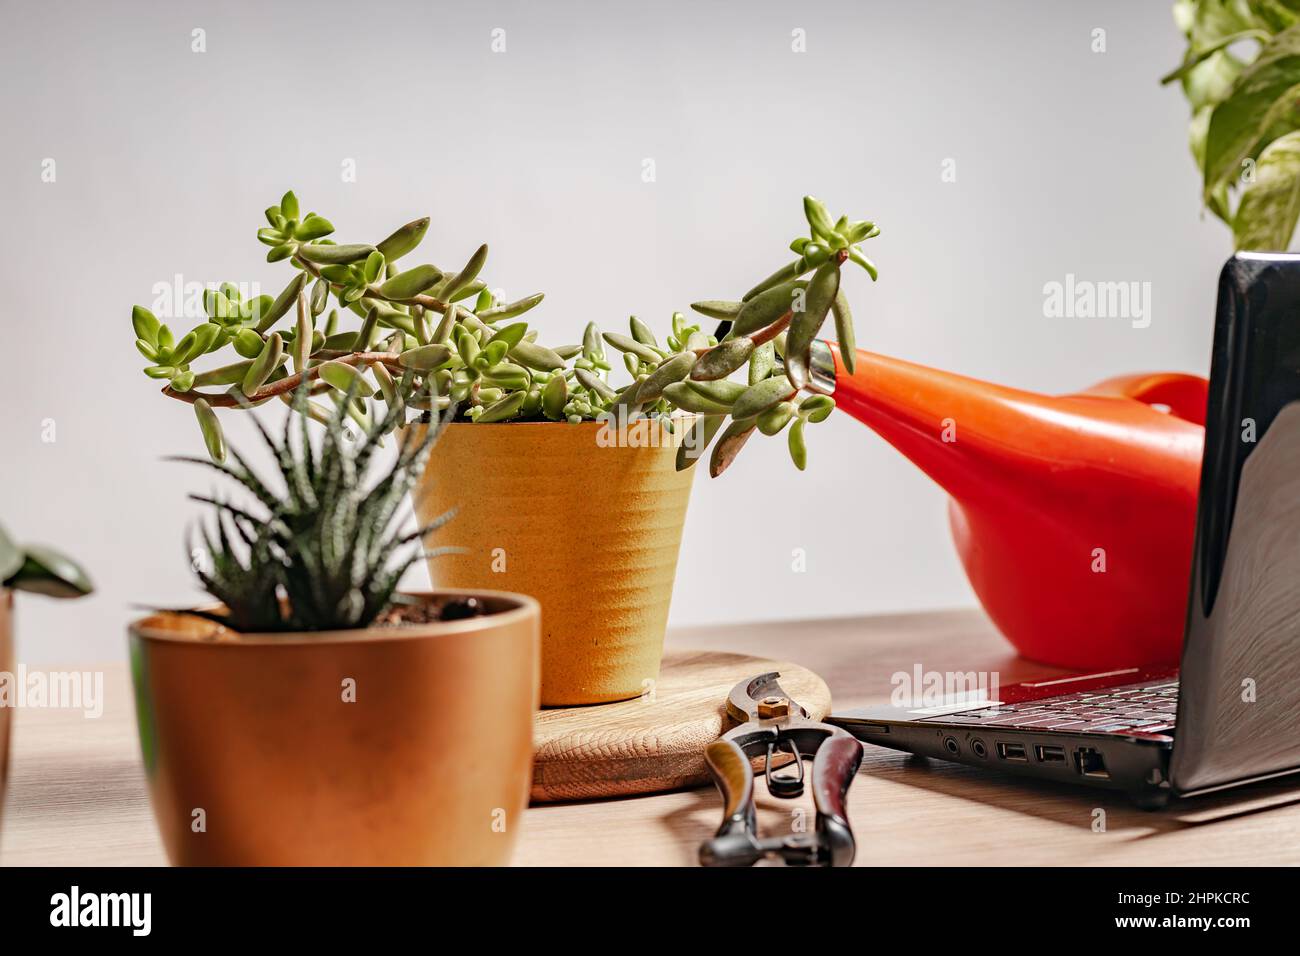 Home plants in pots, accessories for home gardening. Still life on gray background Stock Photo